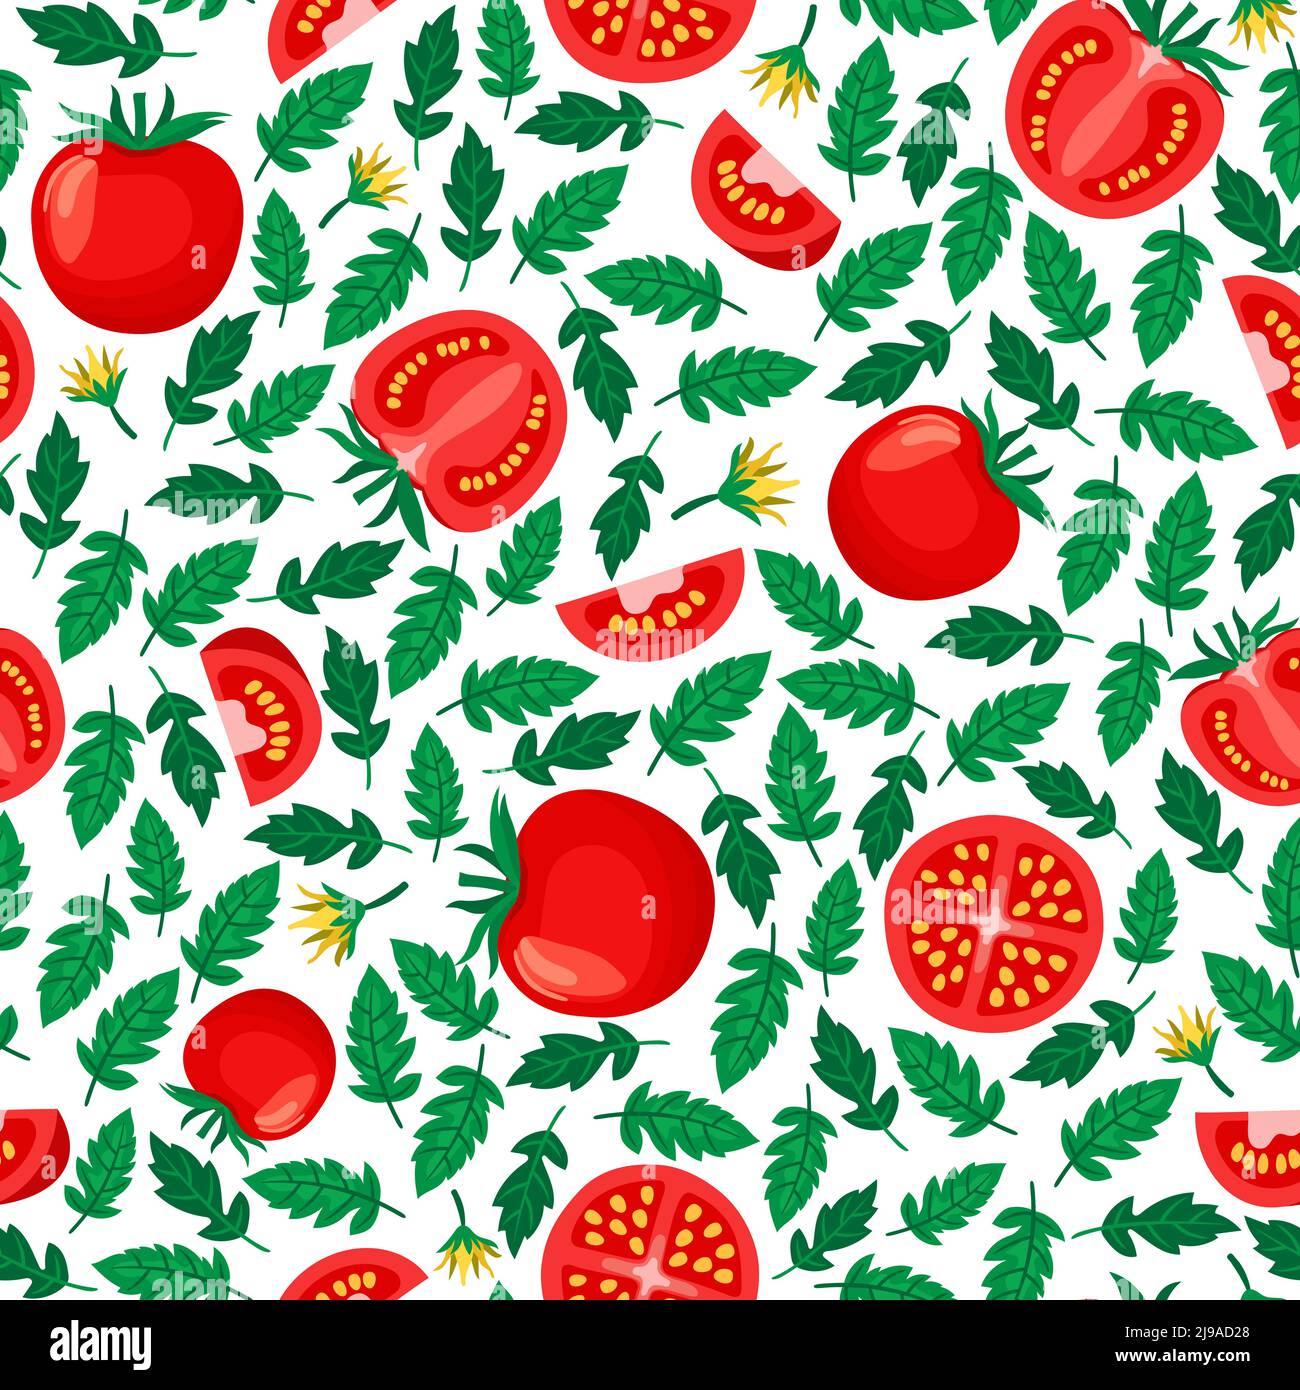 tomatoes seamless pattern, white background with sliced and whole tomatoes and leaves Stock Vector